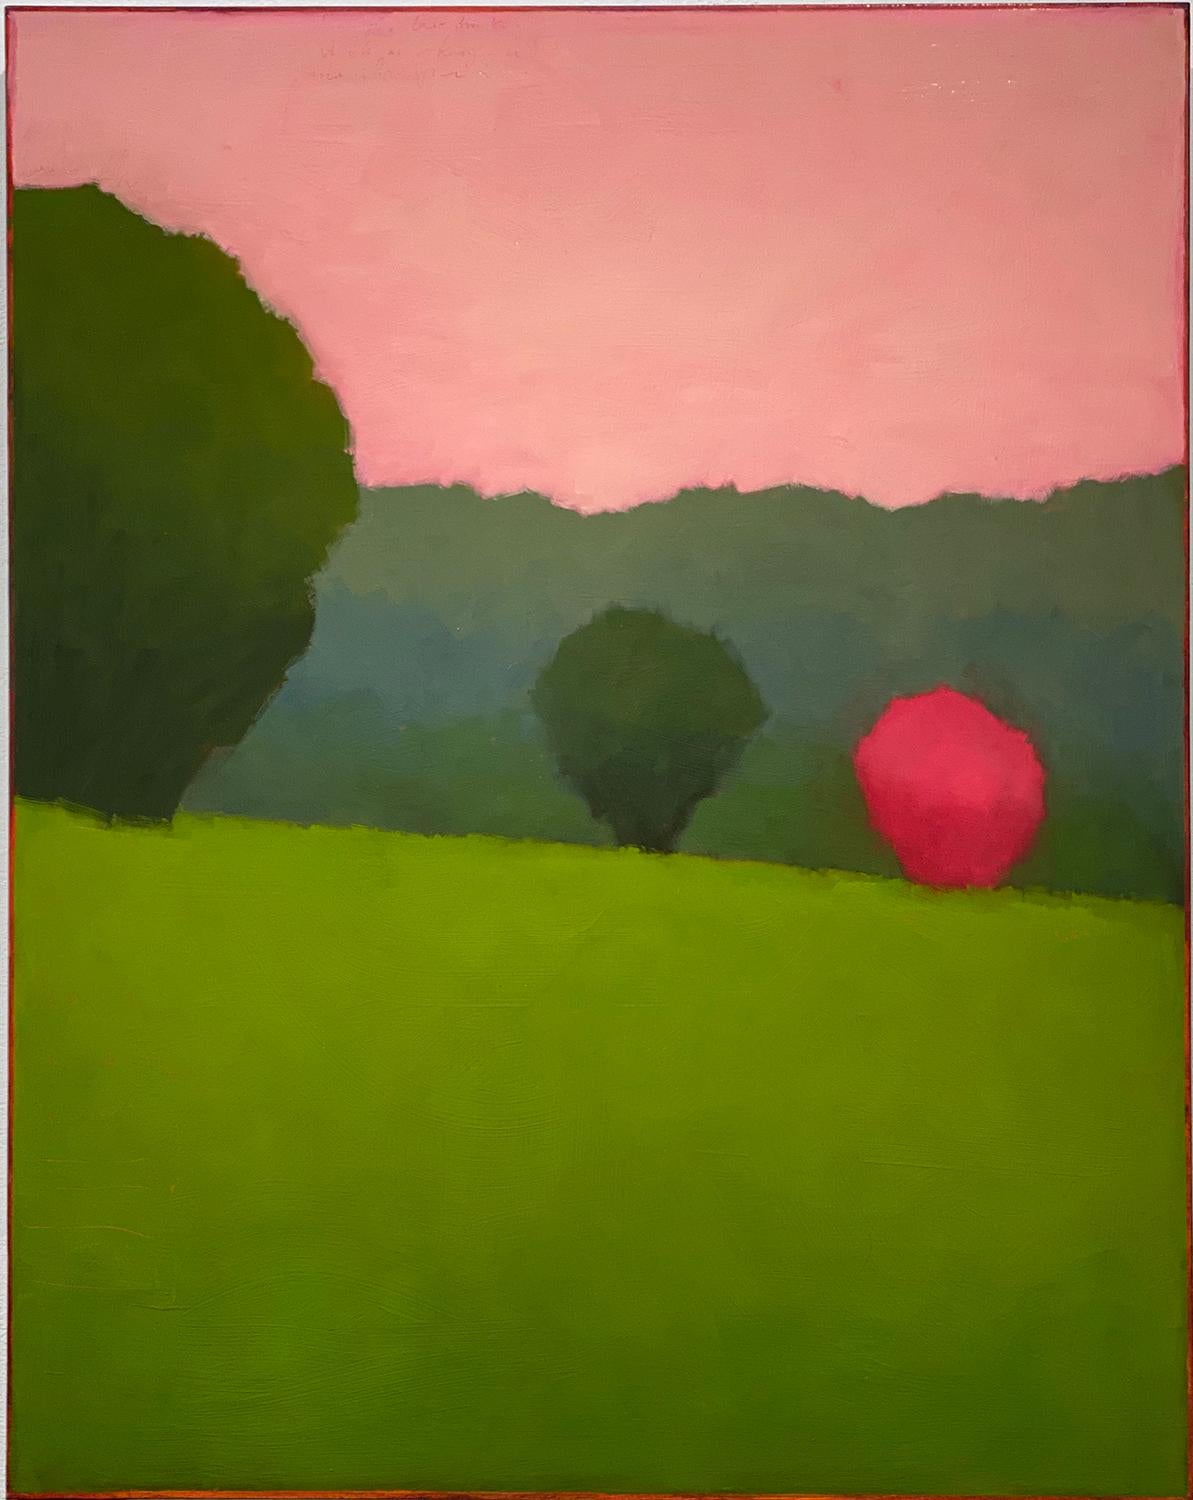 Spring Field (Vertical Color Field Landscape Painting in Pink and Green)